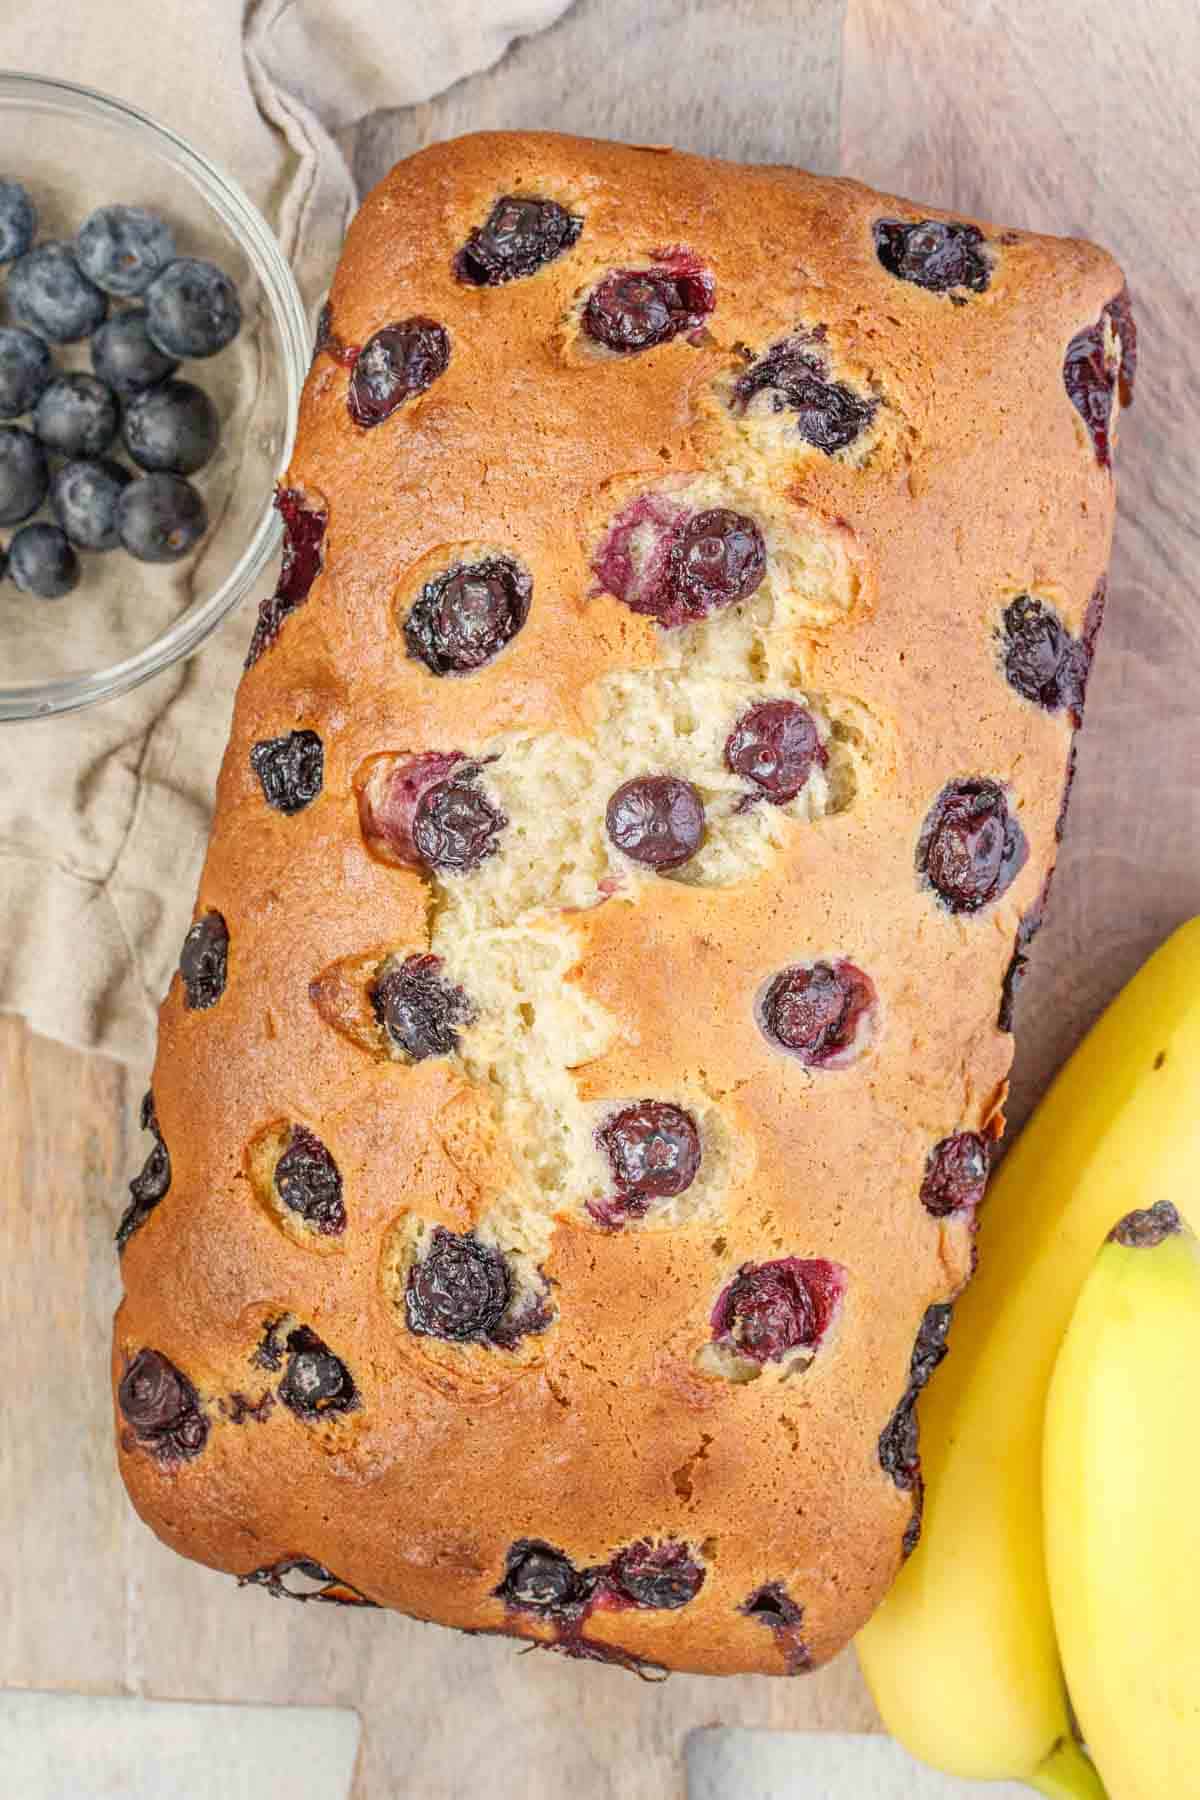 Finished blueberry bread with blueberries and bananas on the side.